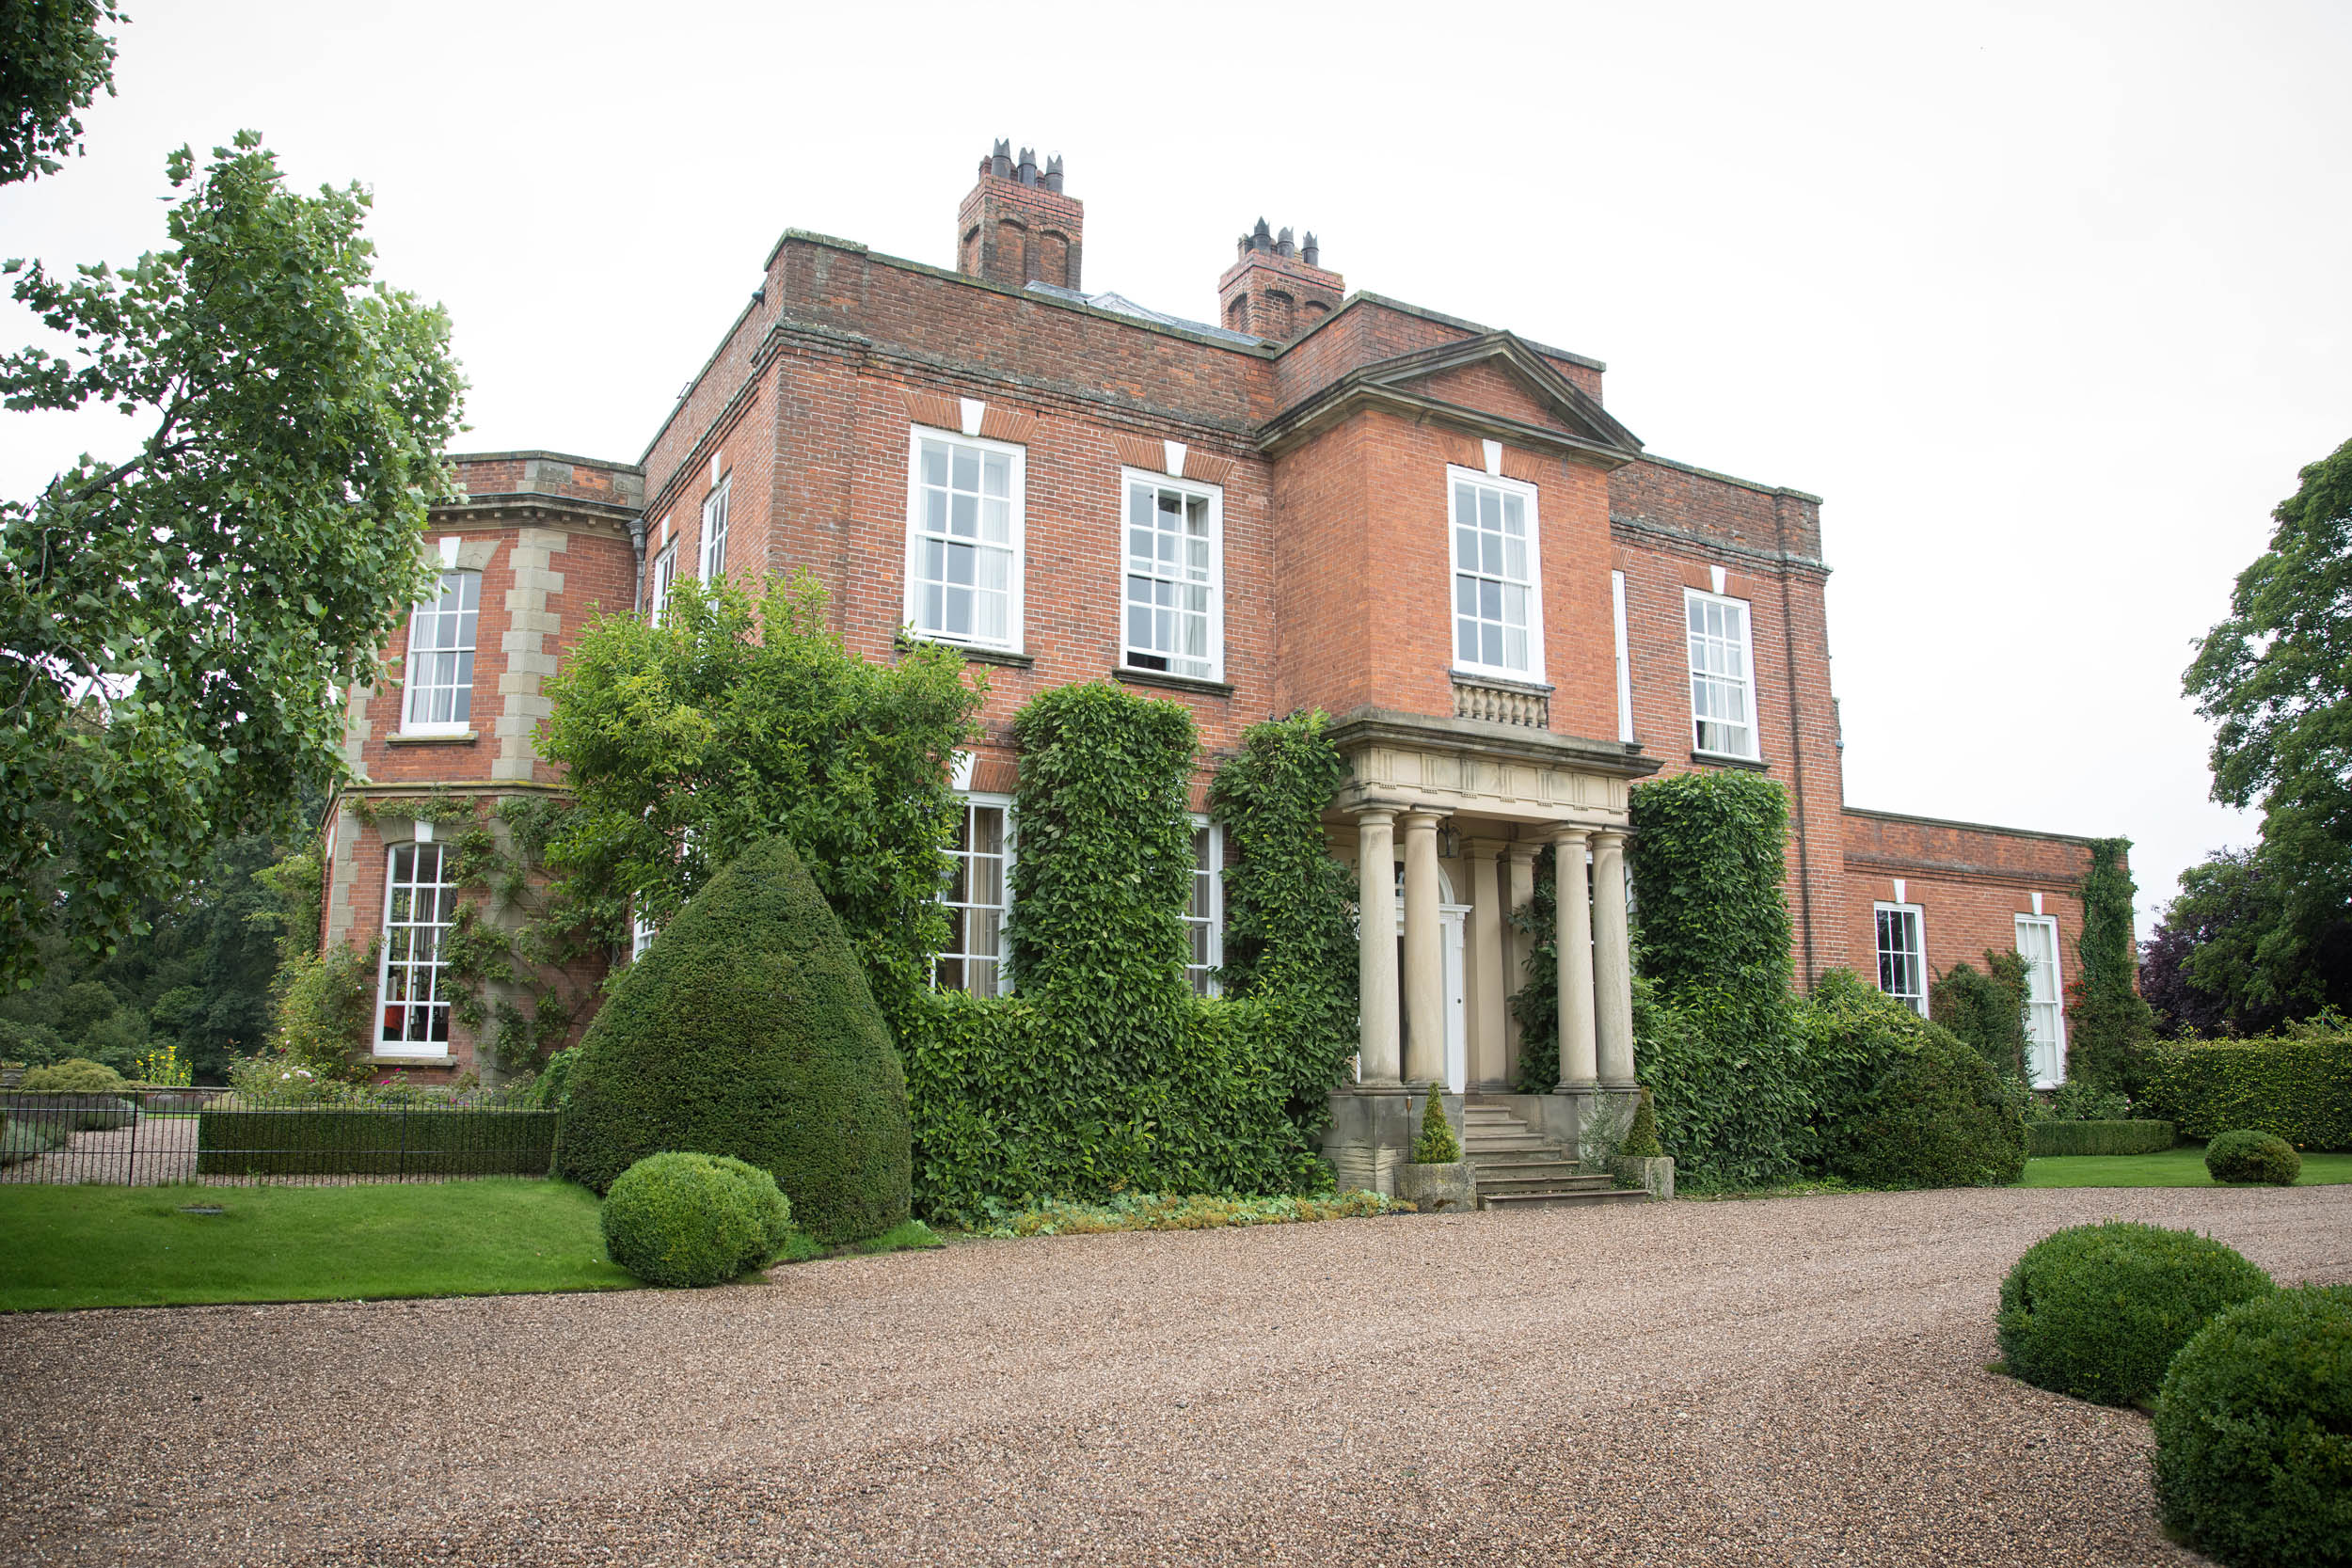 A landscape view of a handsome red brick mansion with a grand stone portico